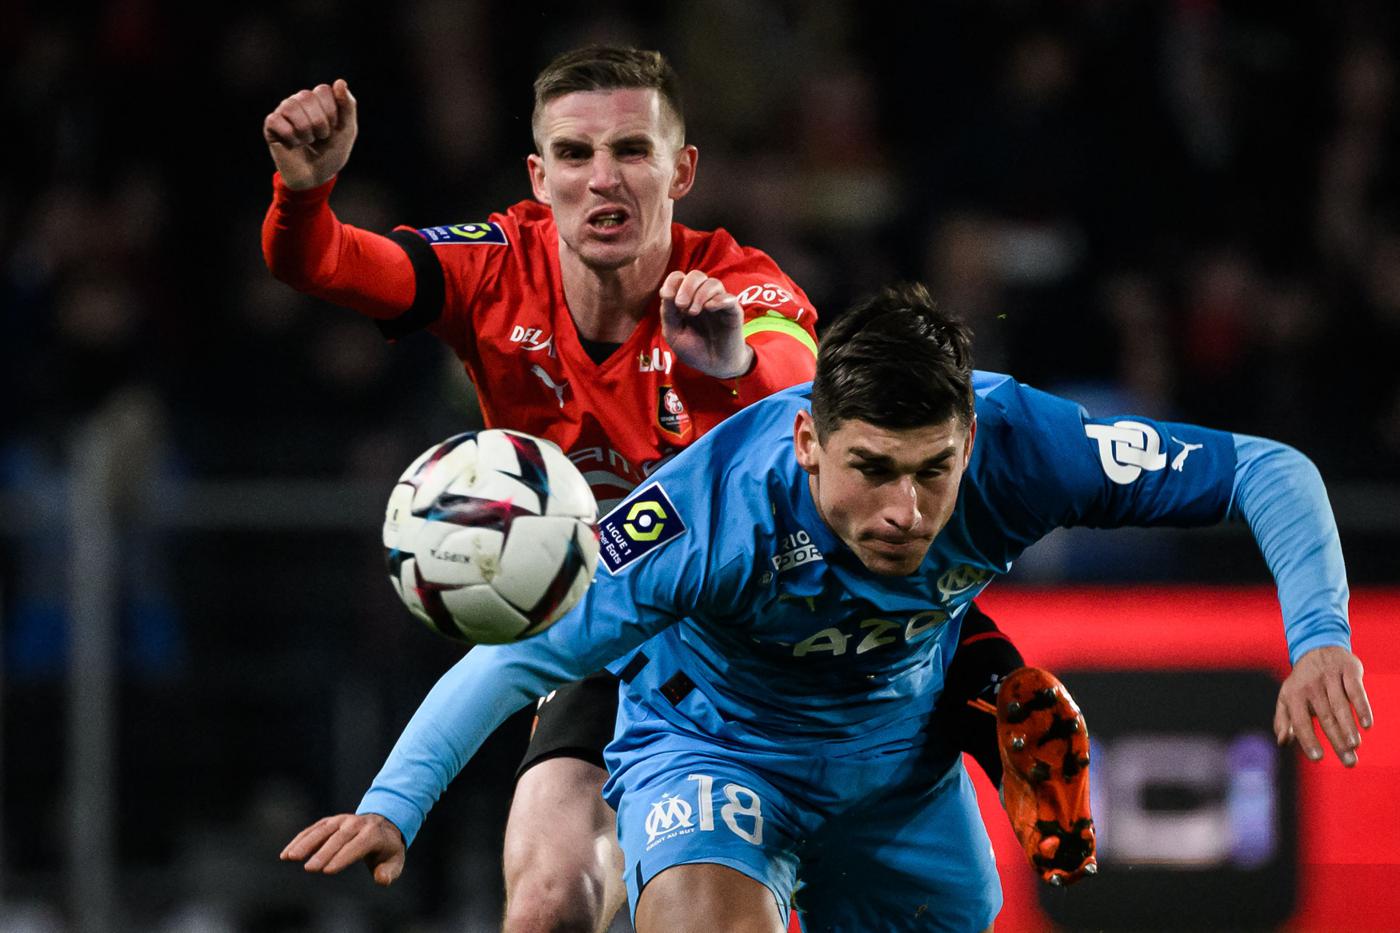 Rennes - Marseille - 0:1. French Championship, 26th round. Match review, statistics